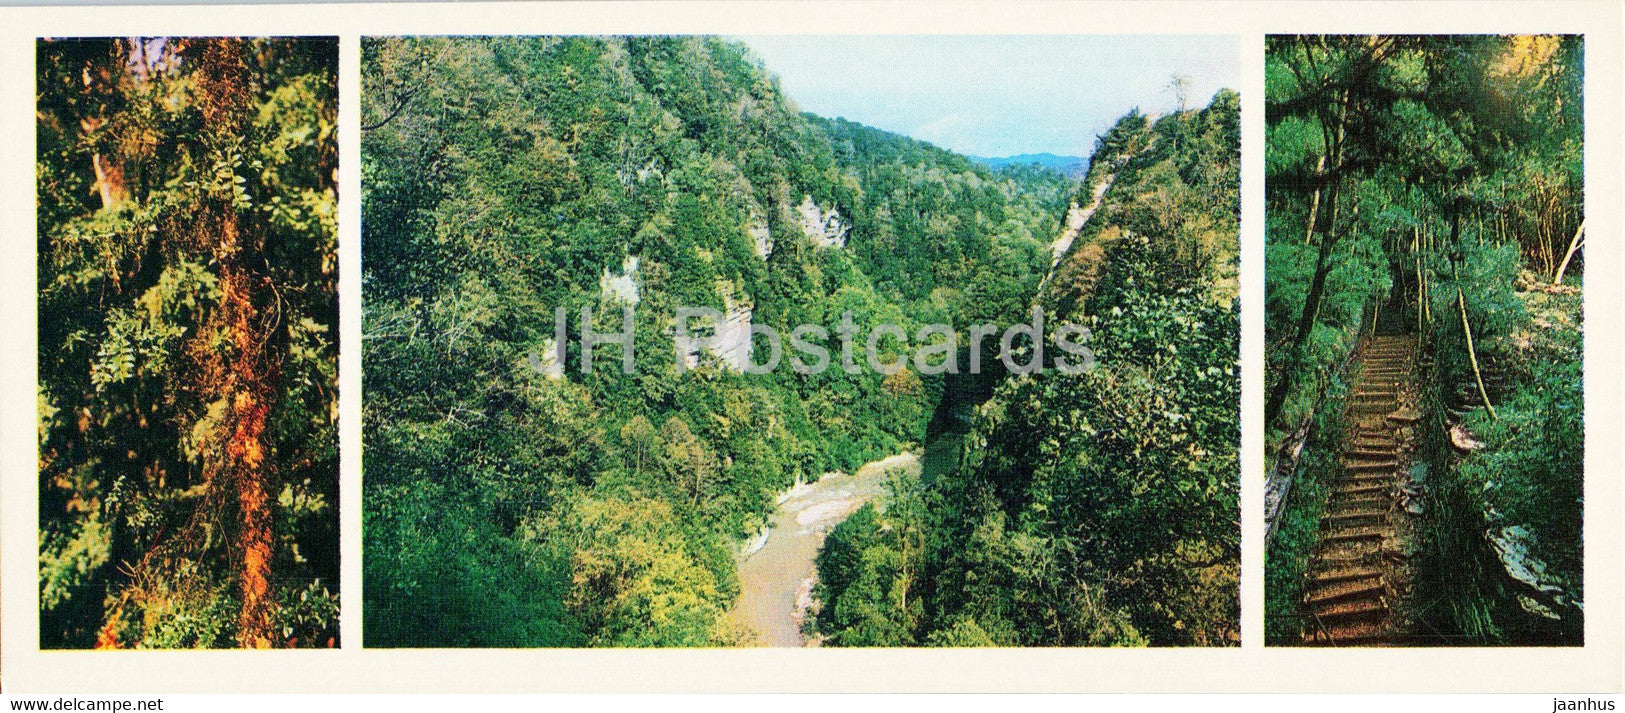 Yew boxwood grove - Caucasian Nature Reserve - 1980 - Russia USSR - unused - JH Postcards